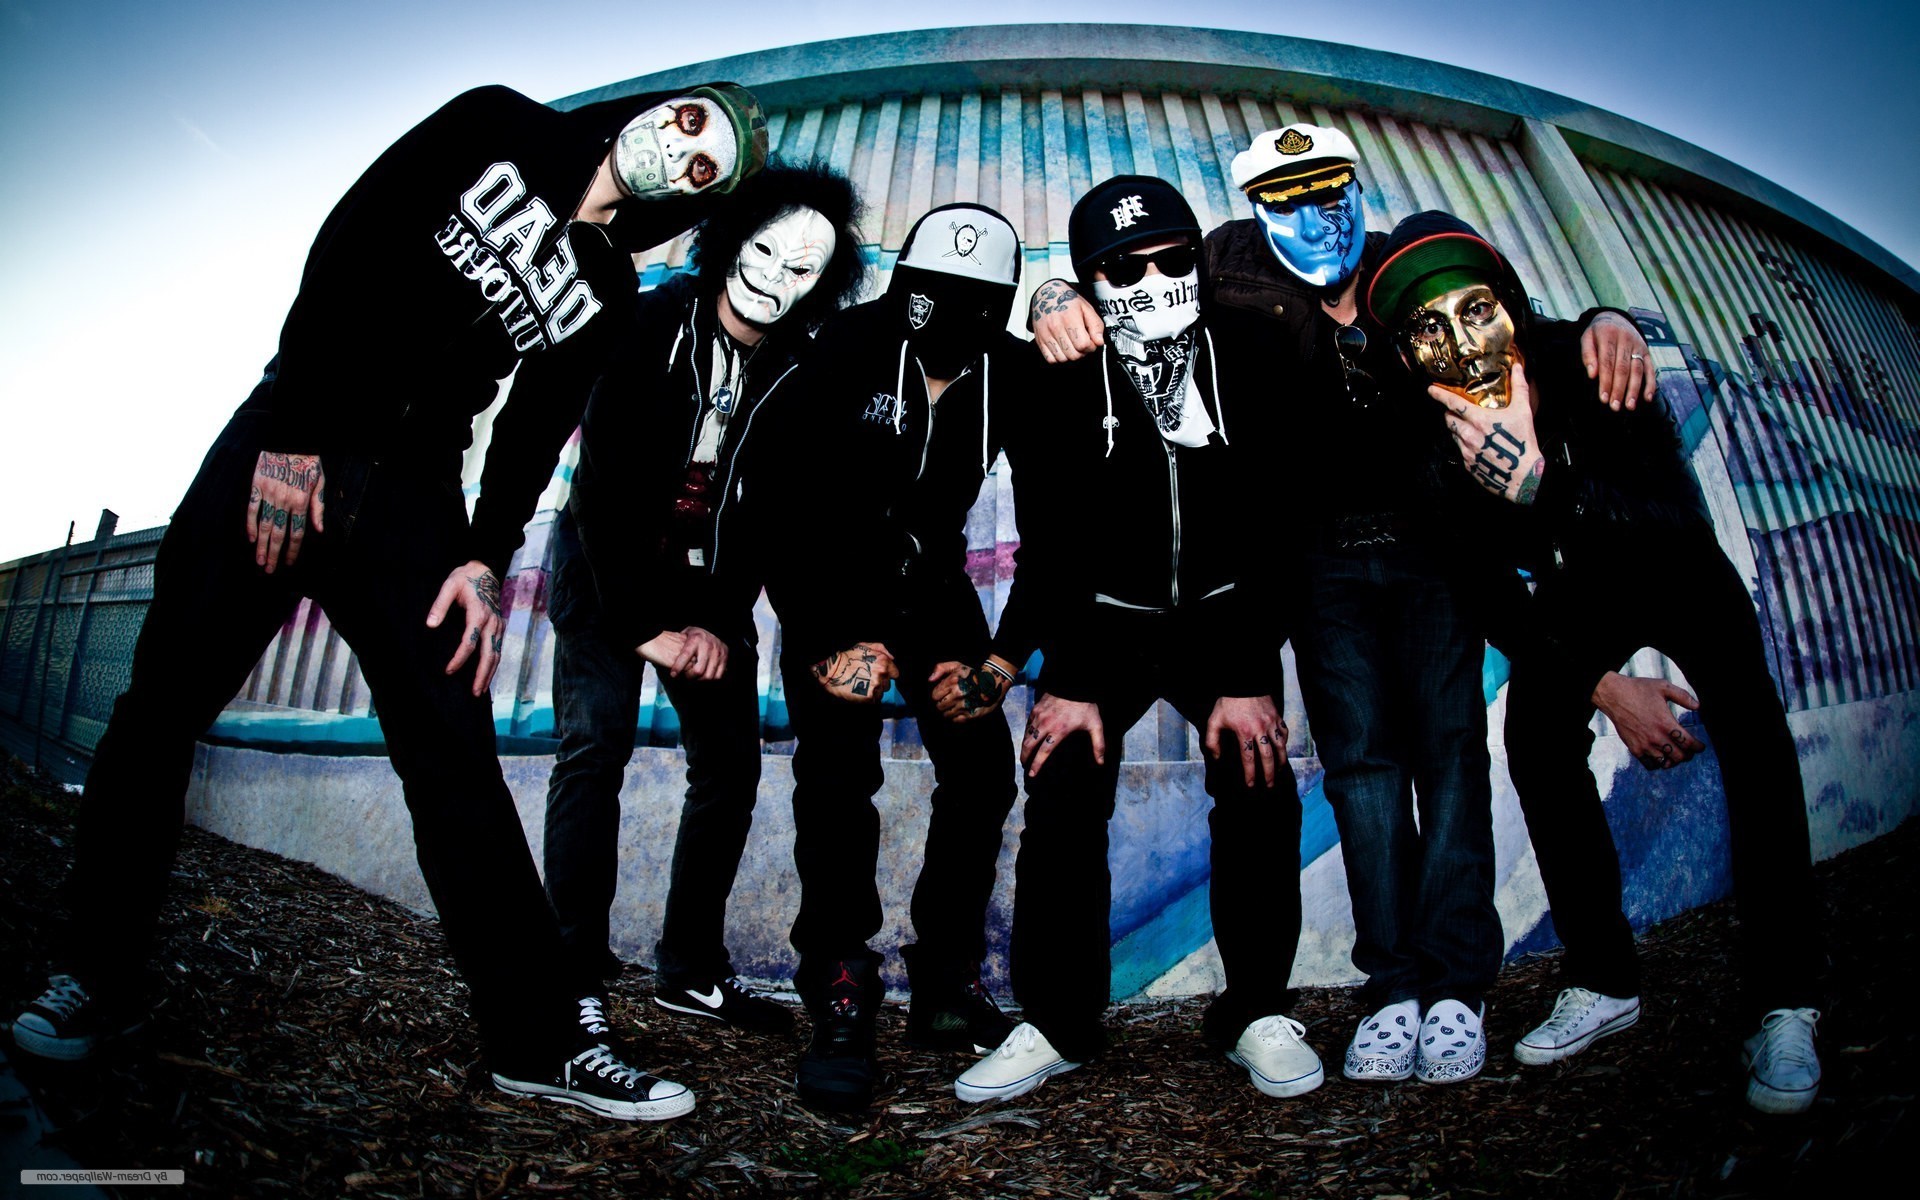 Hollywood Undead Wallpapers Full HD 2C1SYEX   4USkY